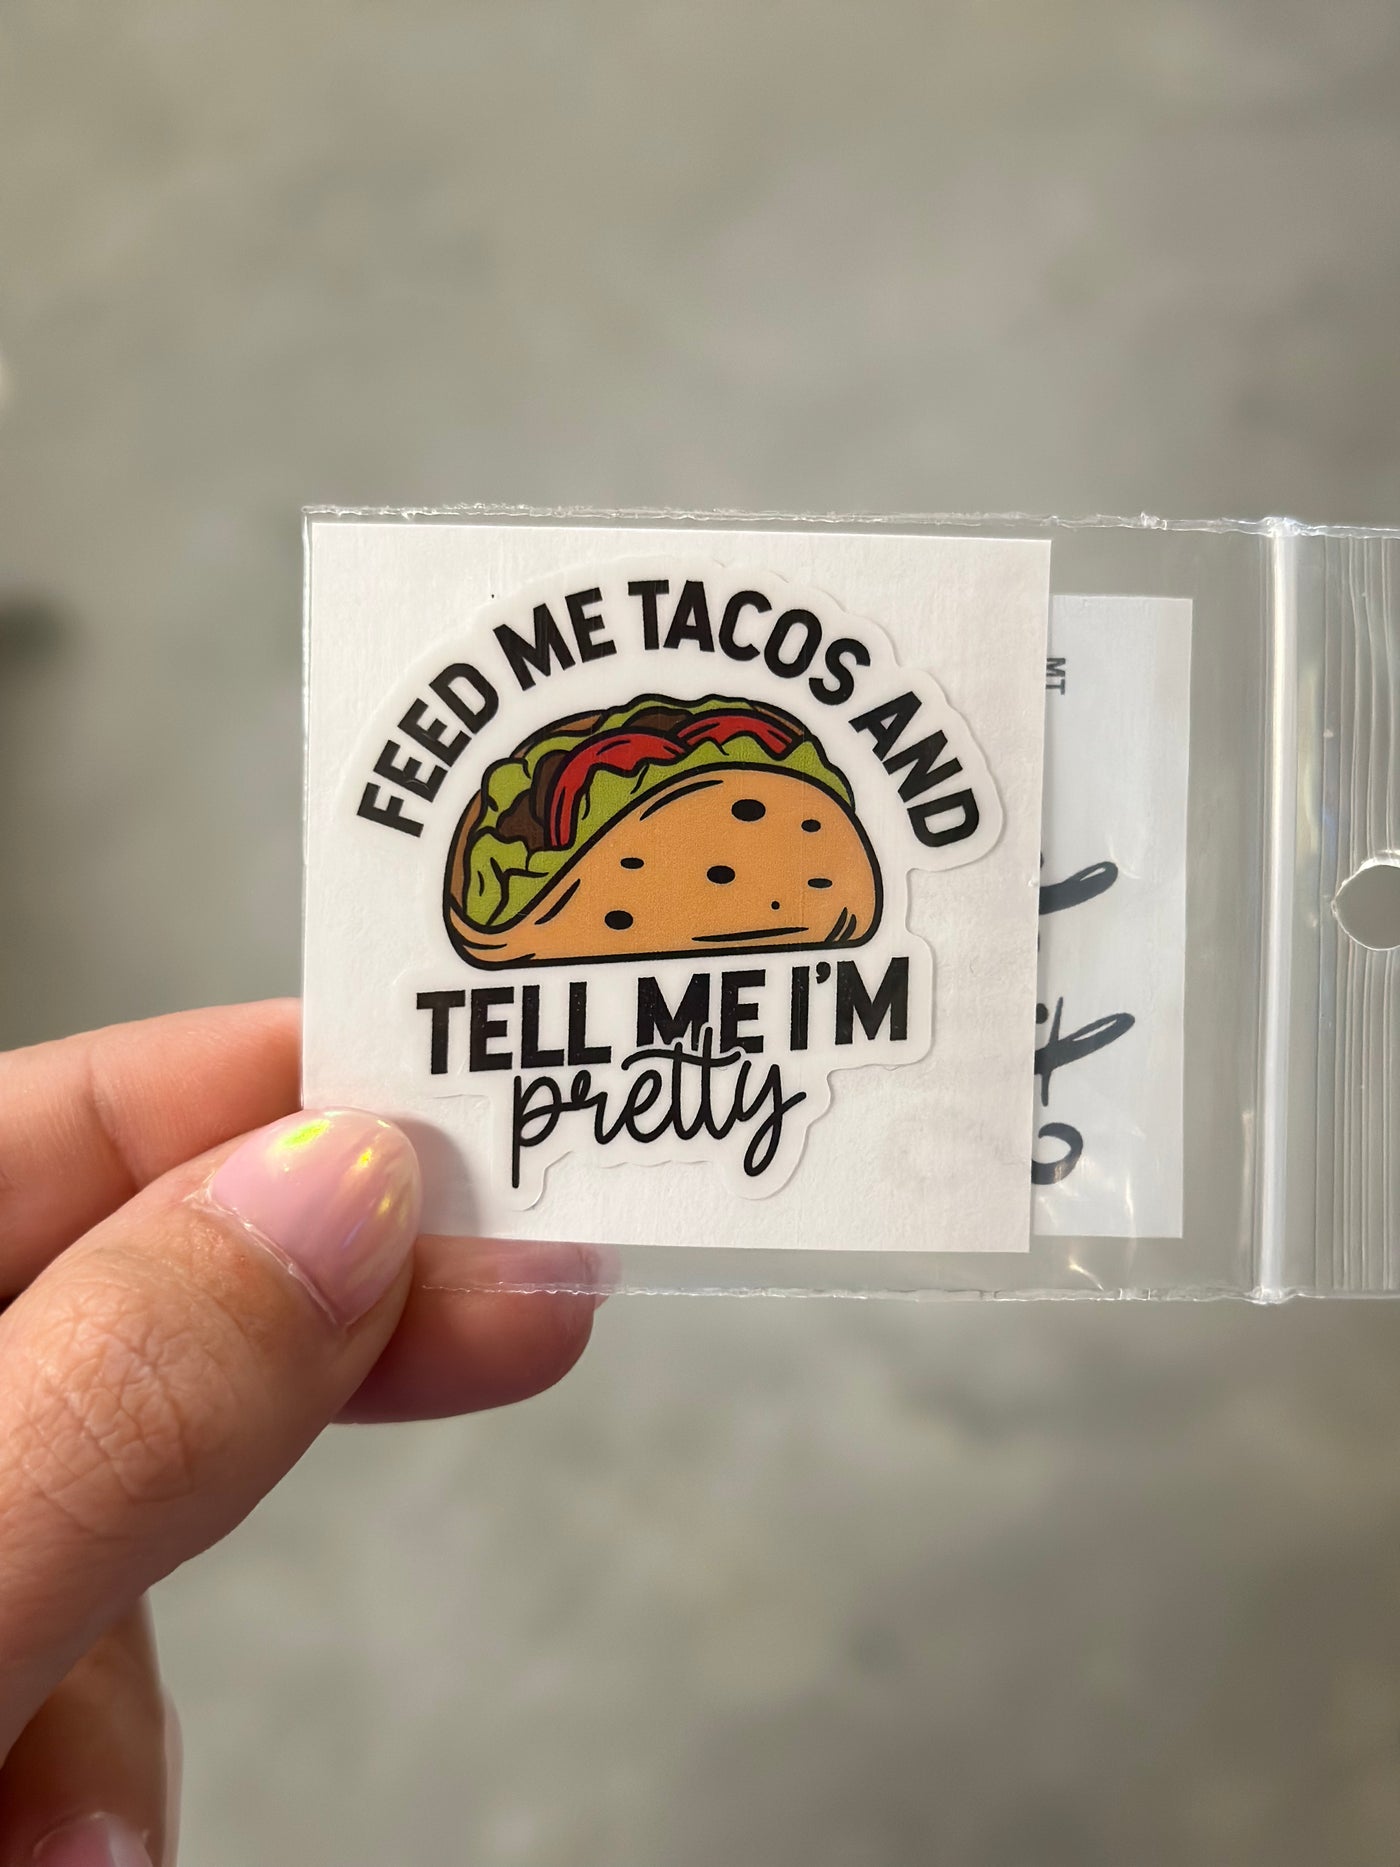 Feed me tacos and tell me I'm pretty sticker